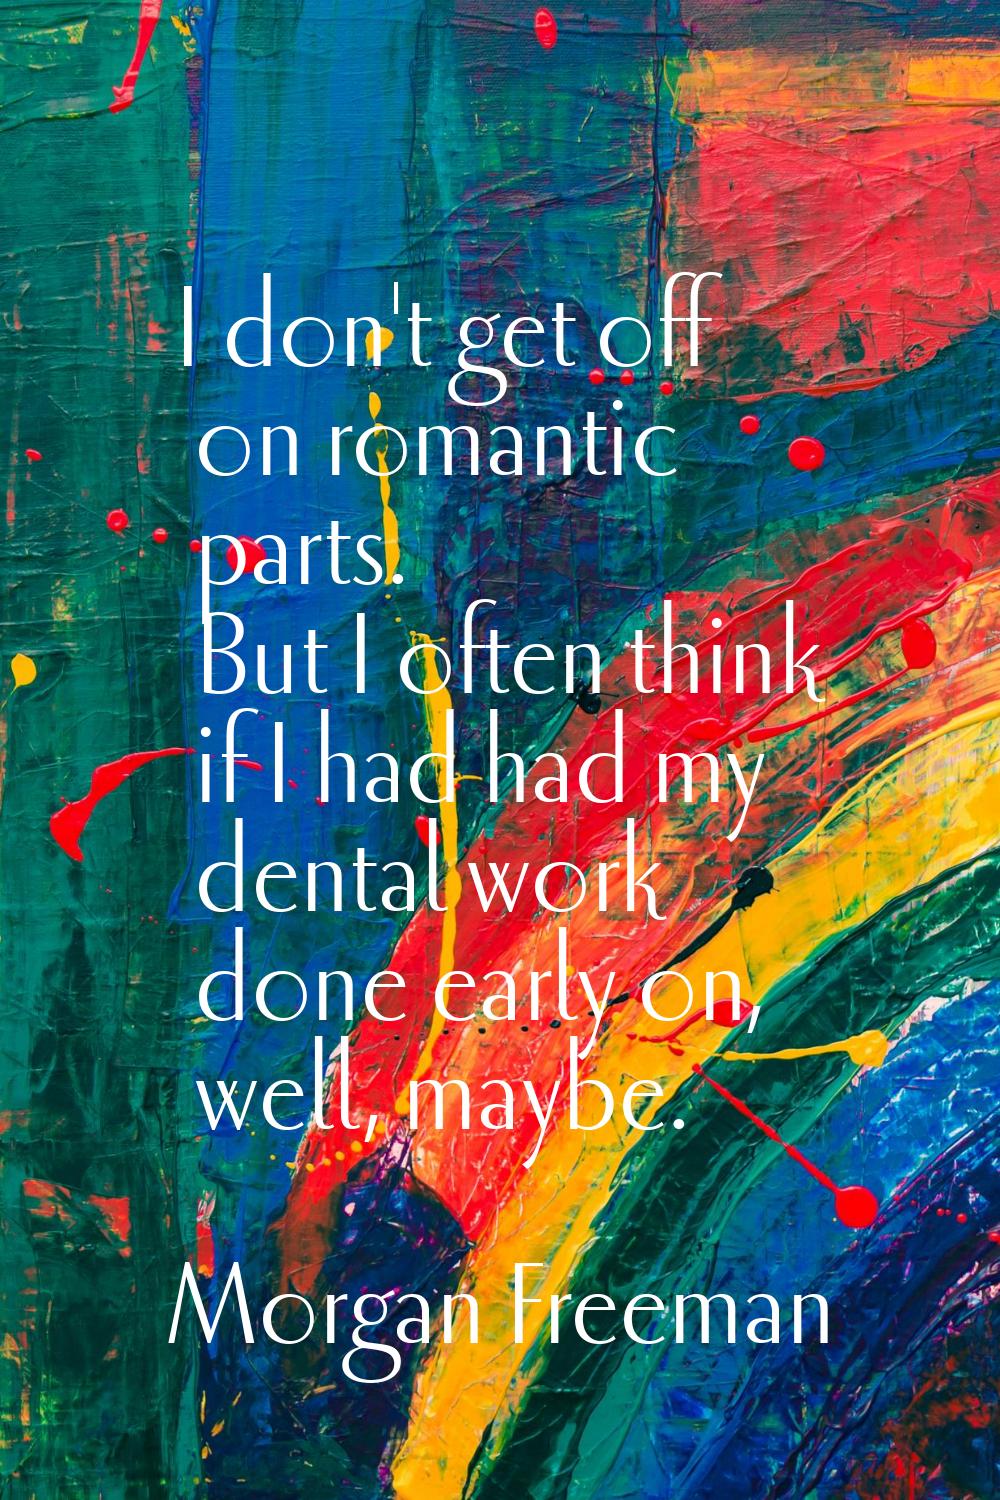 I don't get off on romantic parts. But I often think if I had had my dental work done early on, wel